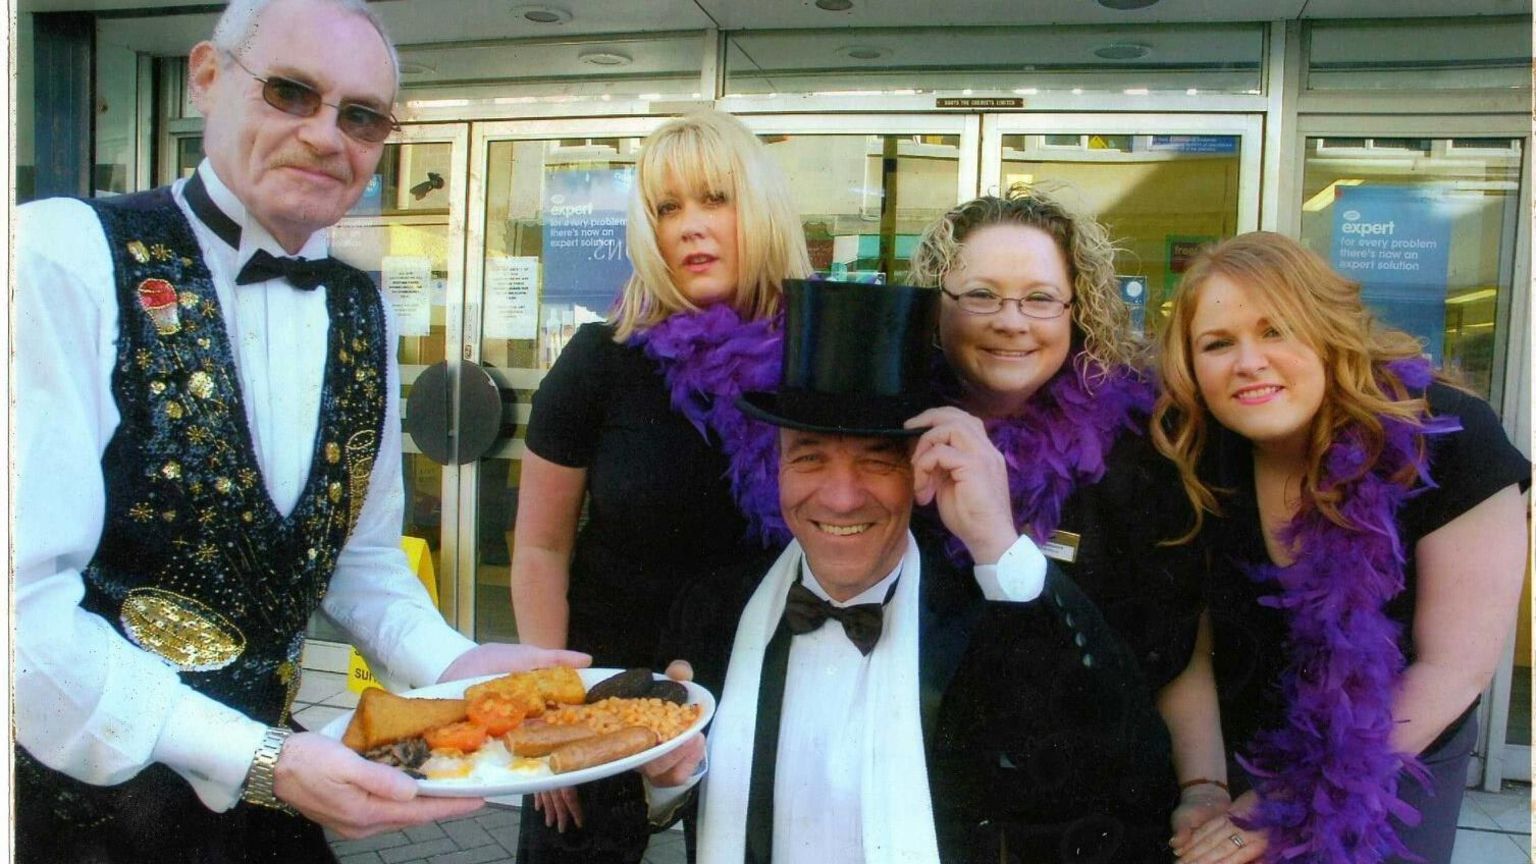 Mr Walker in top hat and tails being served breakfast on his Big Issue pitch outside Boots in Weston-super-Mare surrounded by ladies in feather boas and a man in bow tie and waistcoat